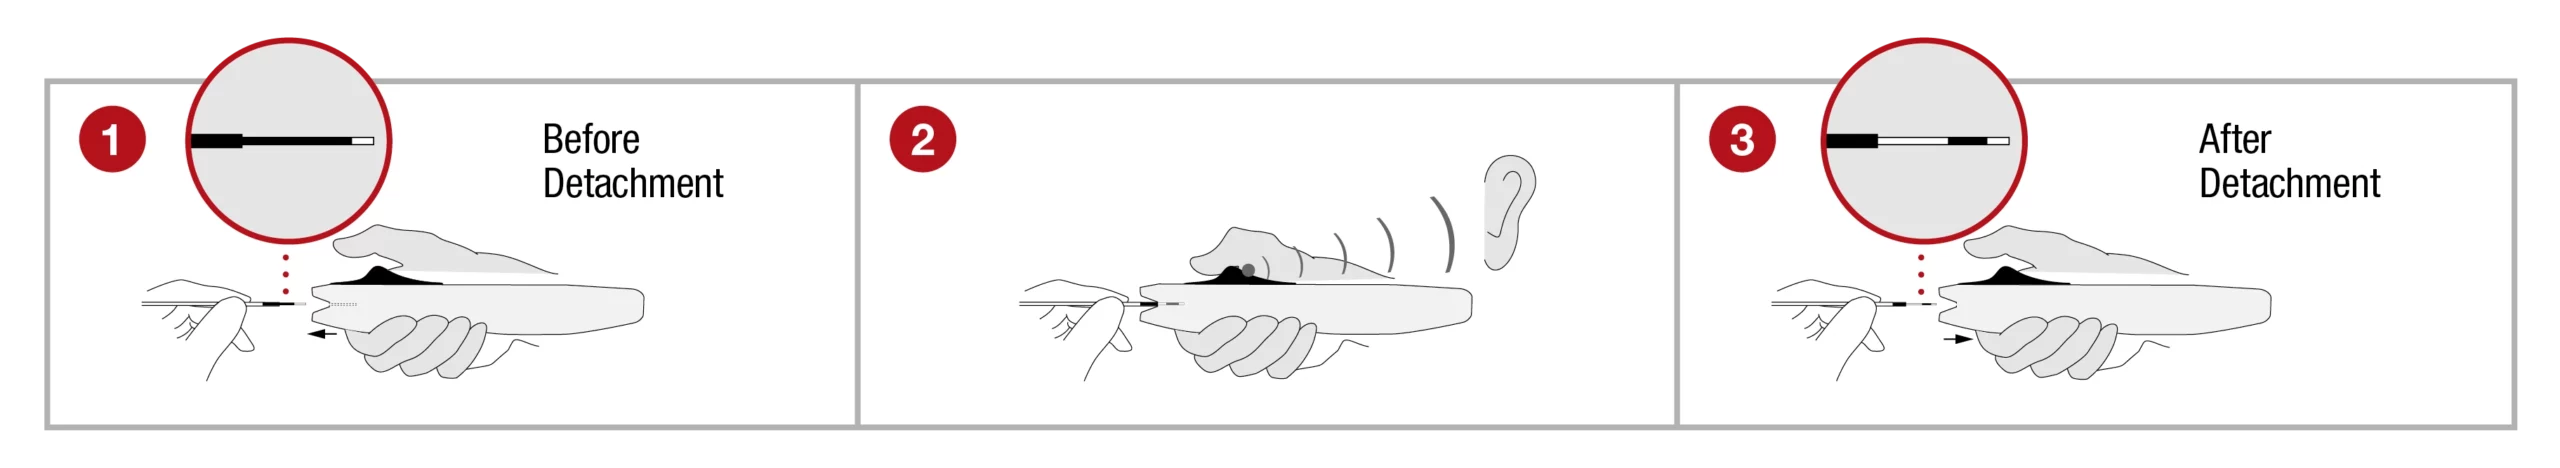 Diagram illustrating instructions on how to use detachment handle